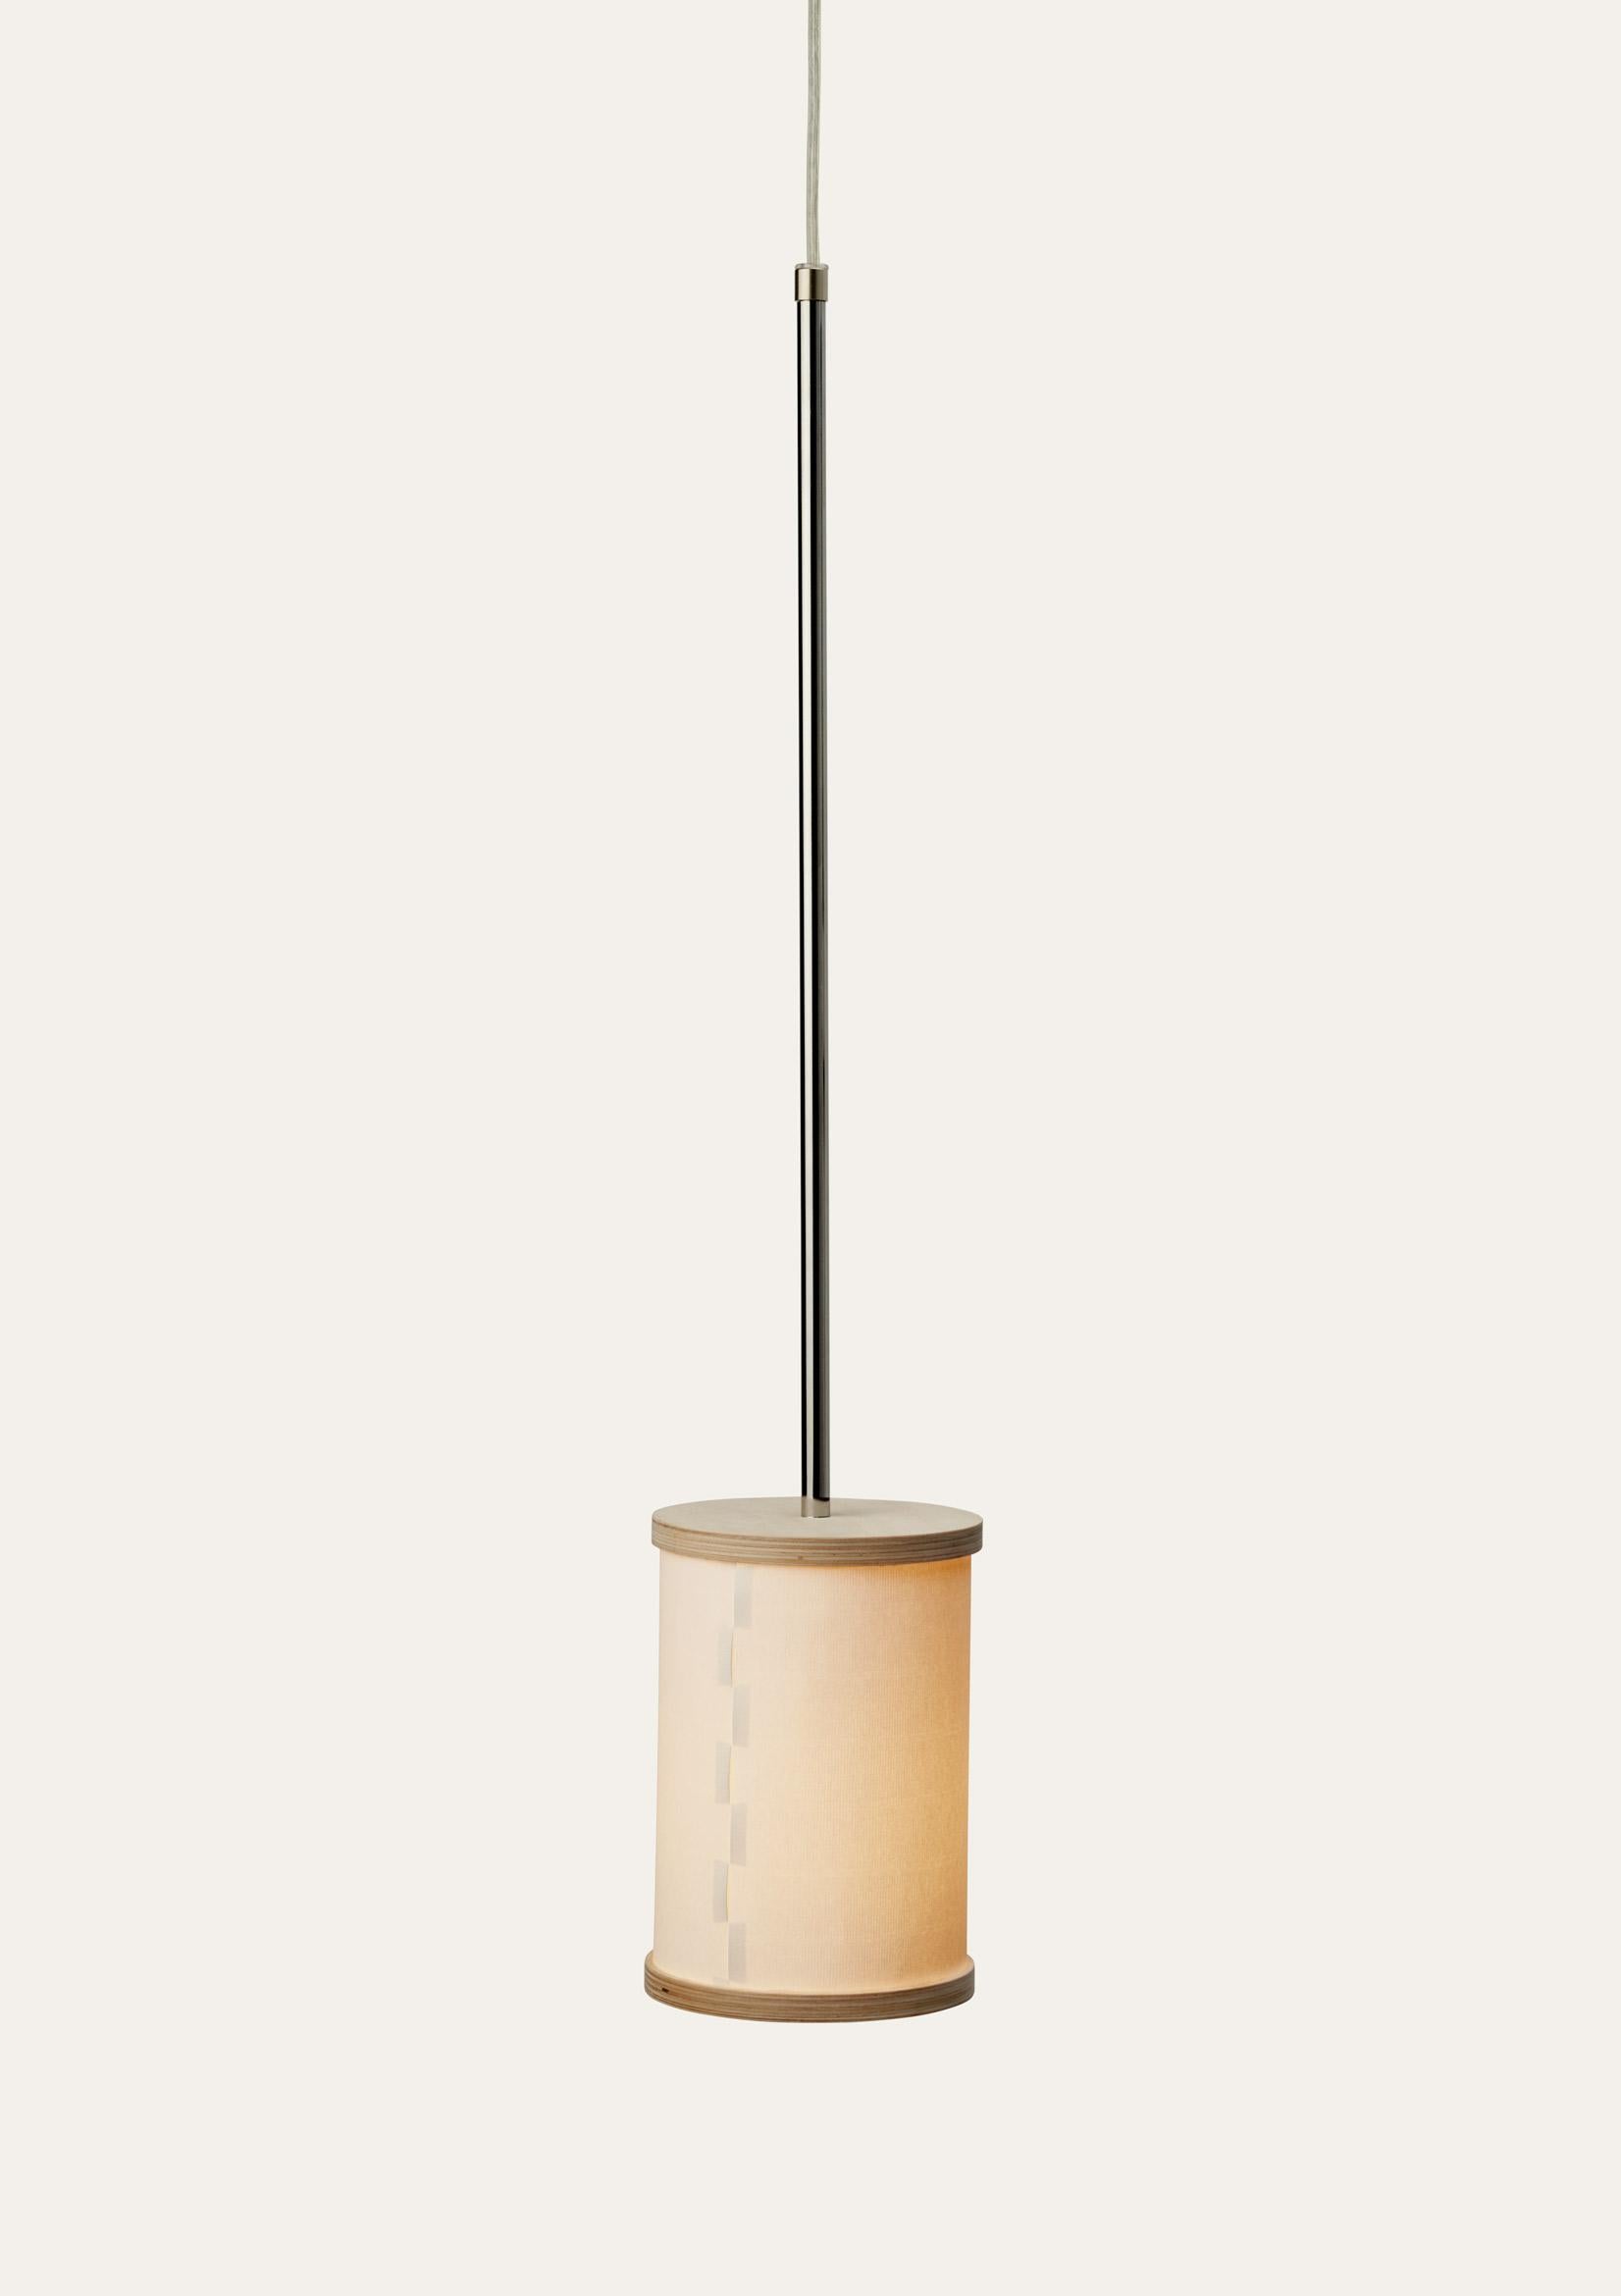 Papp pendant lamp by Storängen Design
Dimensions: D 20 x W 13.5 x H 75 cm
Materials: birch plywood, watercolor paper, metal.

A simple yet elegant pendant lamp in plywood and watercolor paper. The screen’s composition is inspired by a dovetail